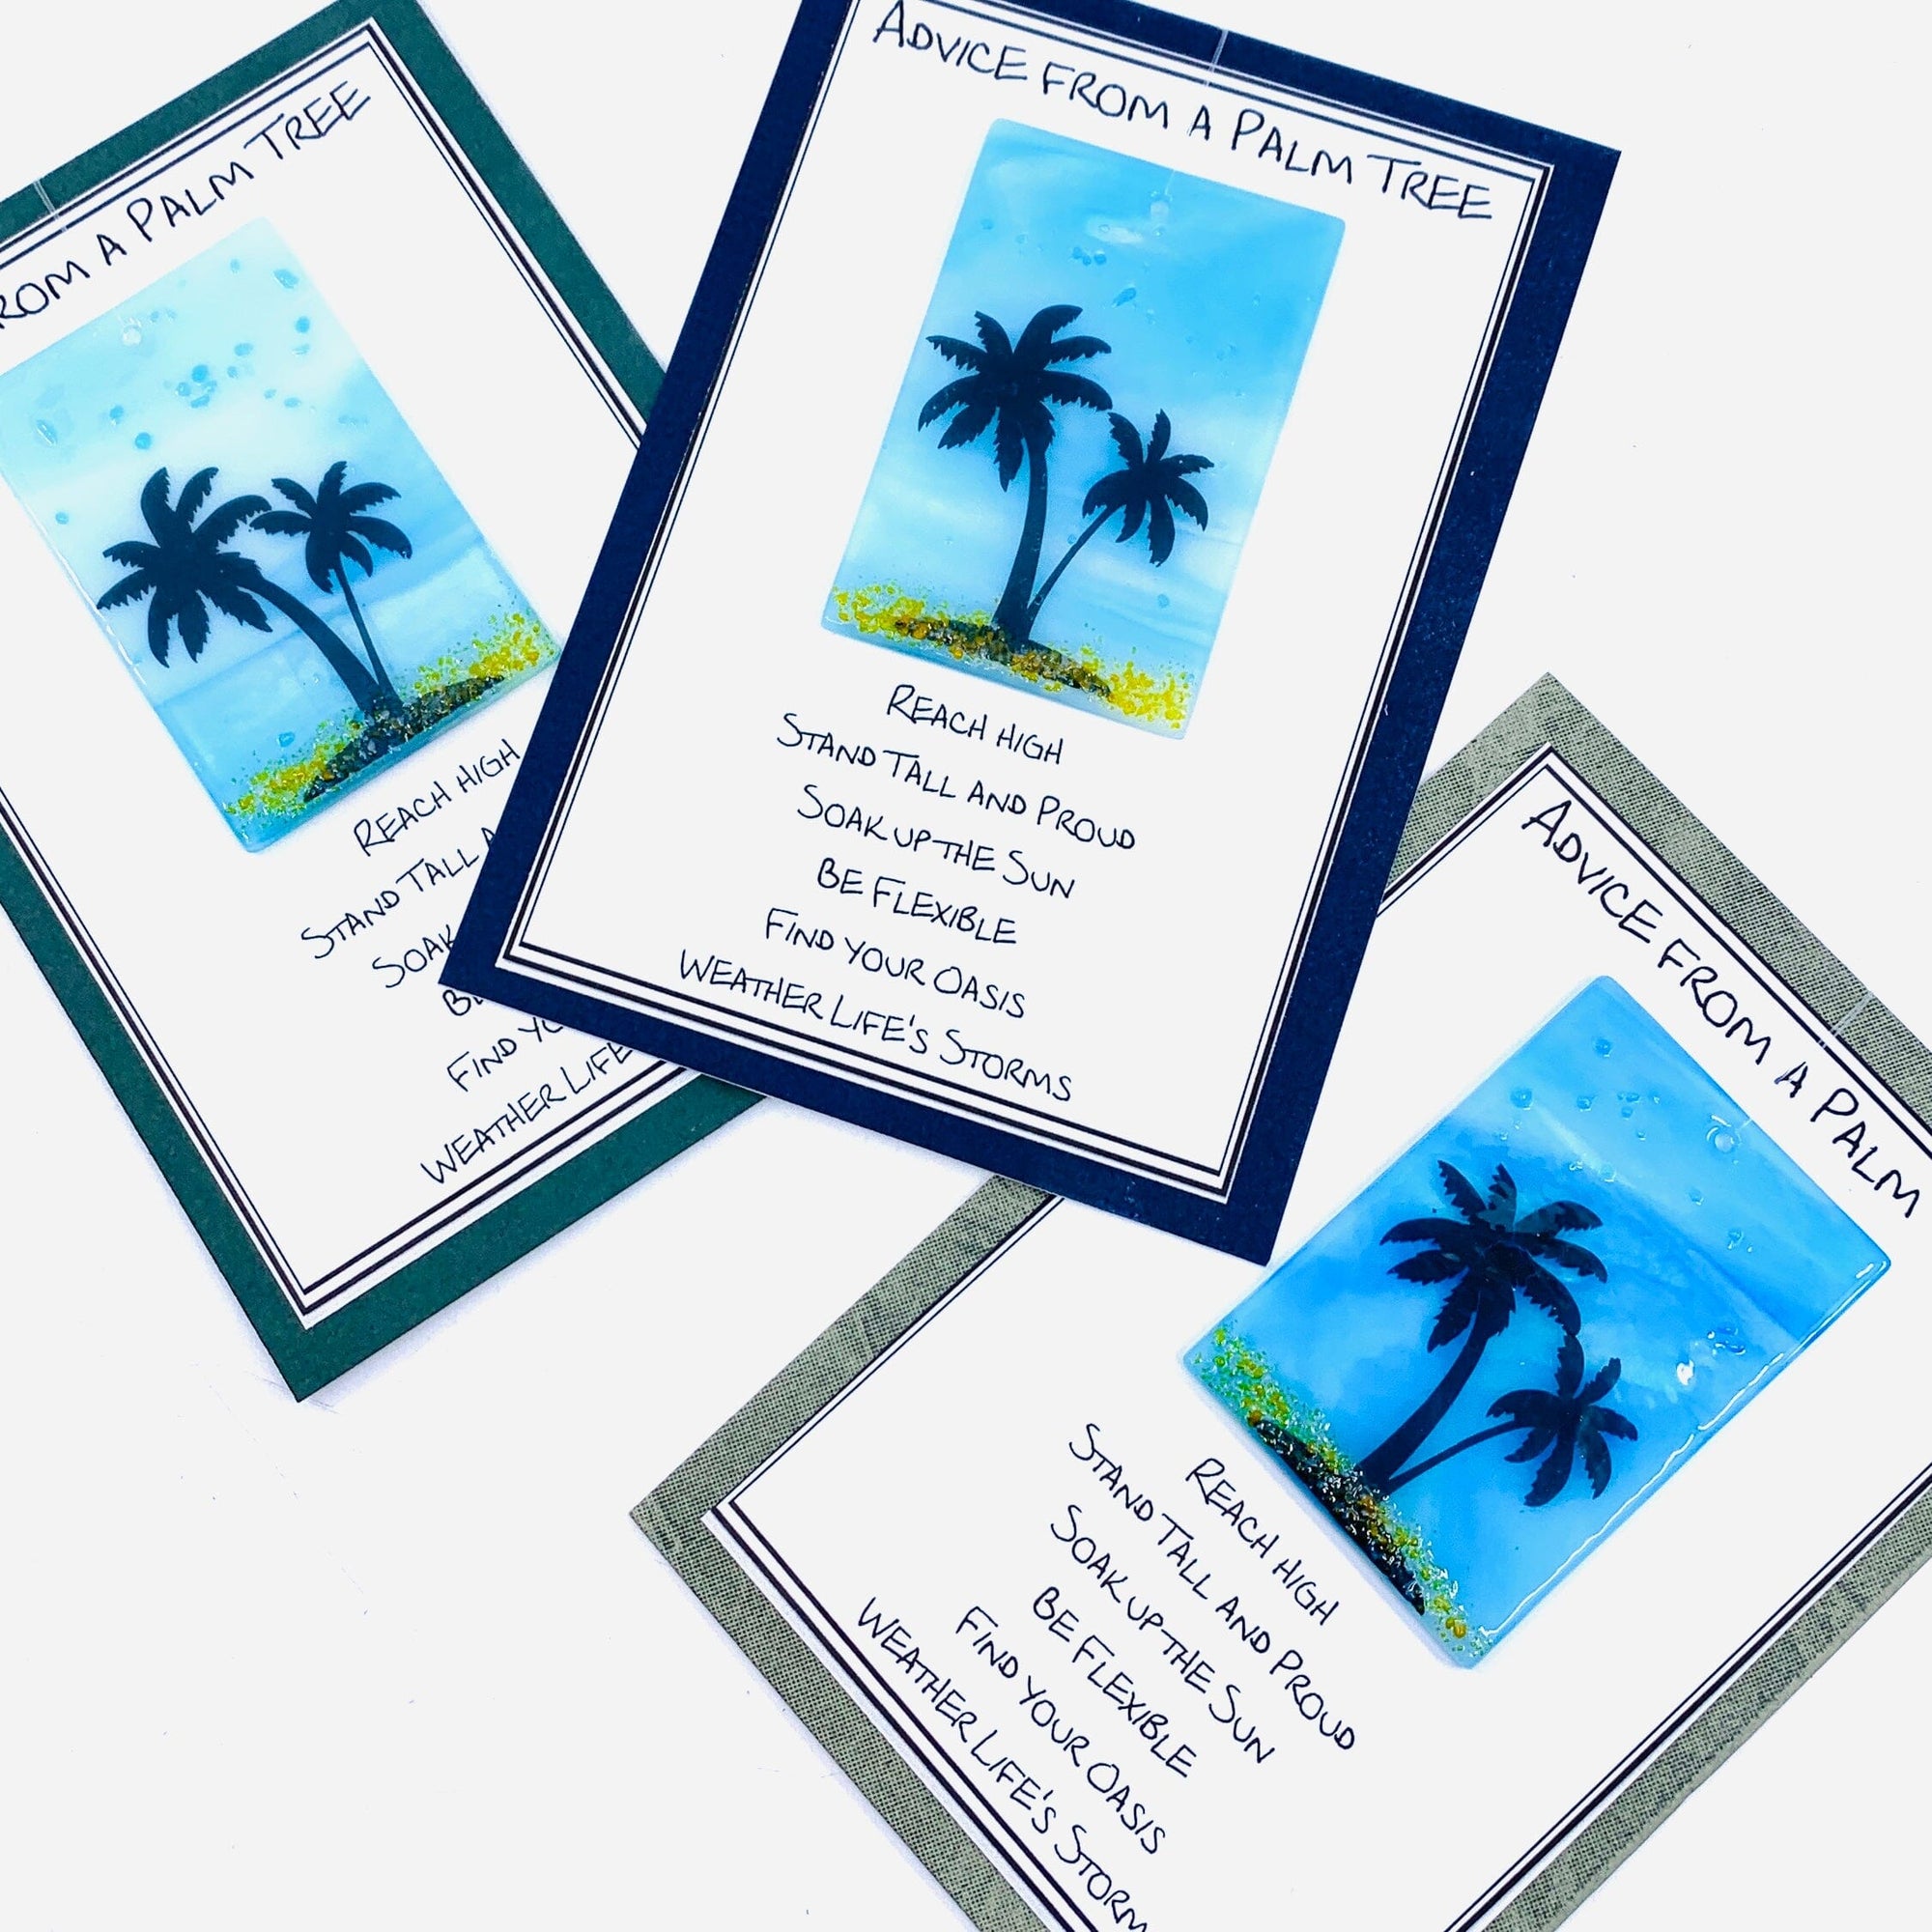 Fused Glass Advice From a Palm Tree 1 Decor Glimmer Glass Gifts 